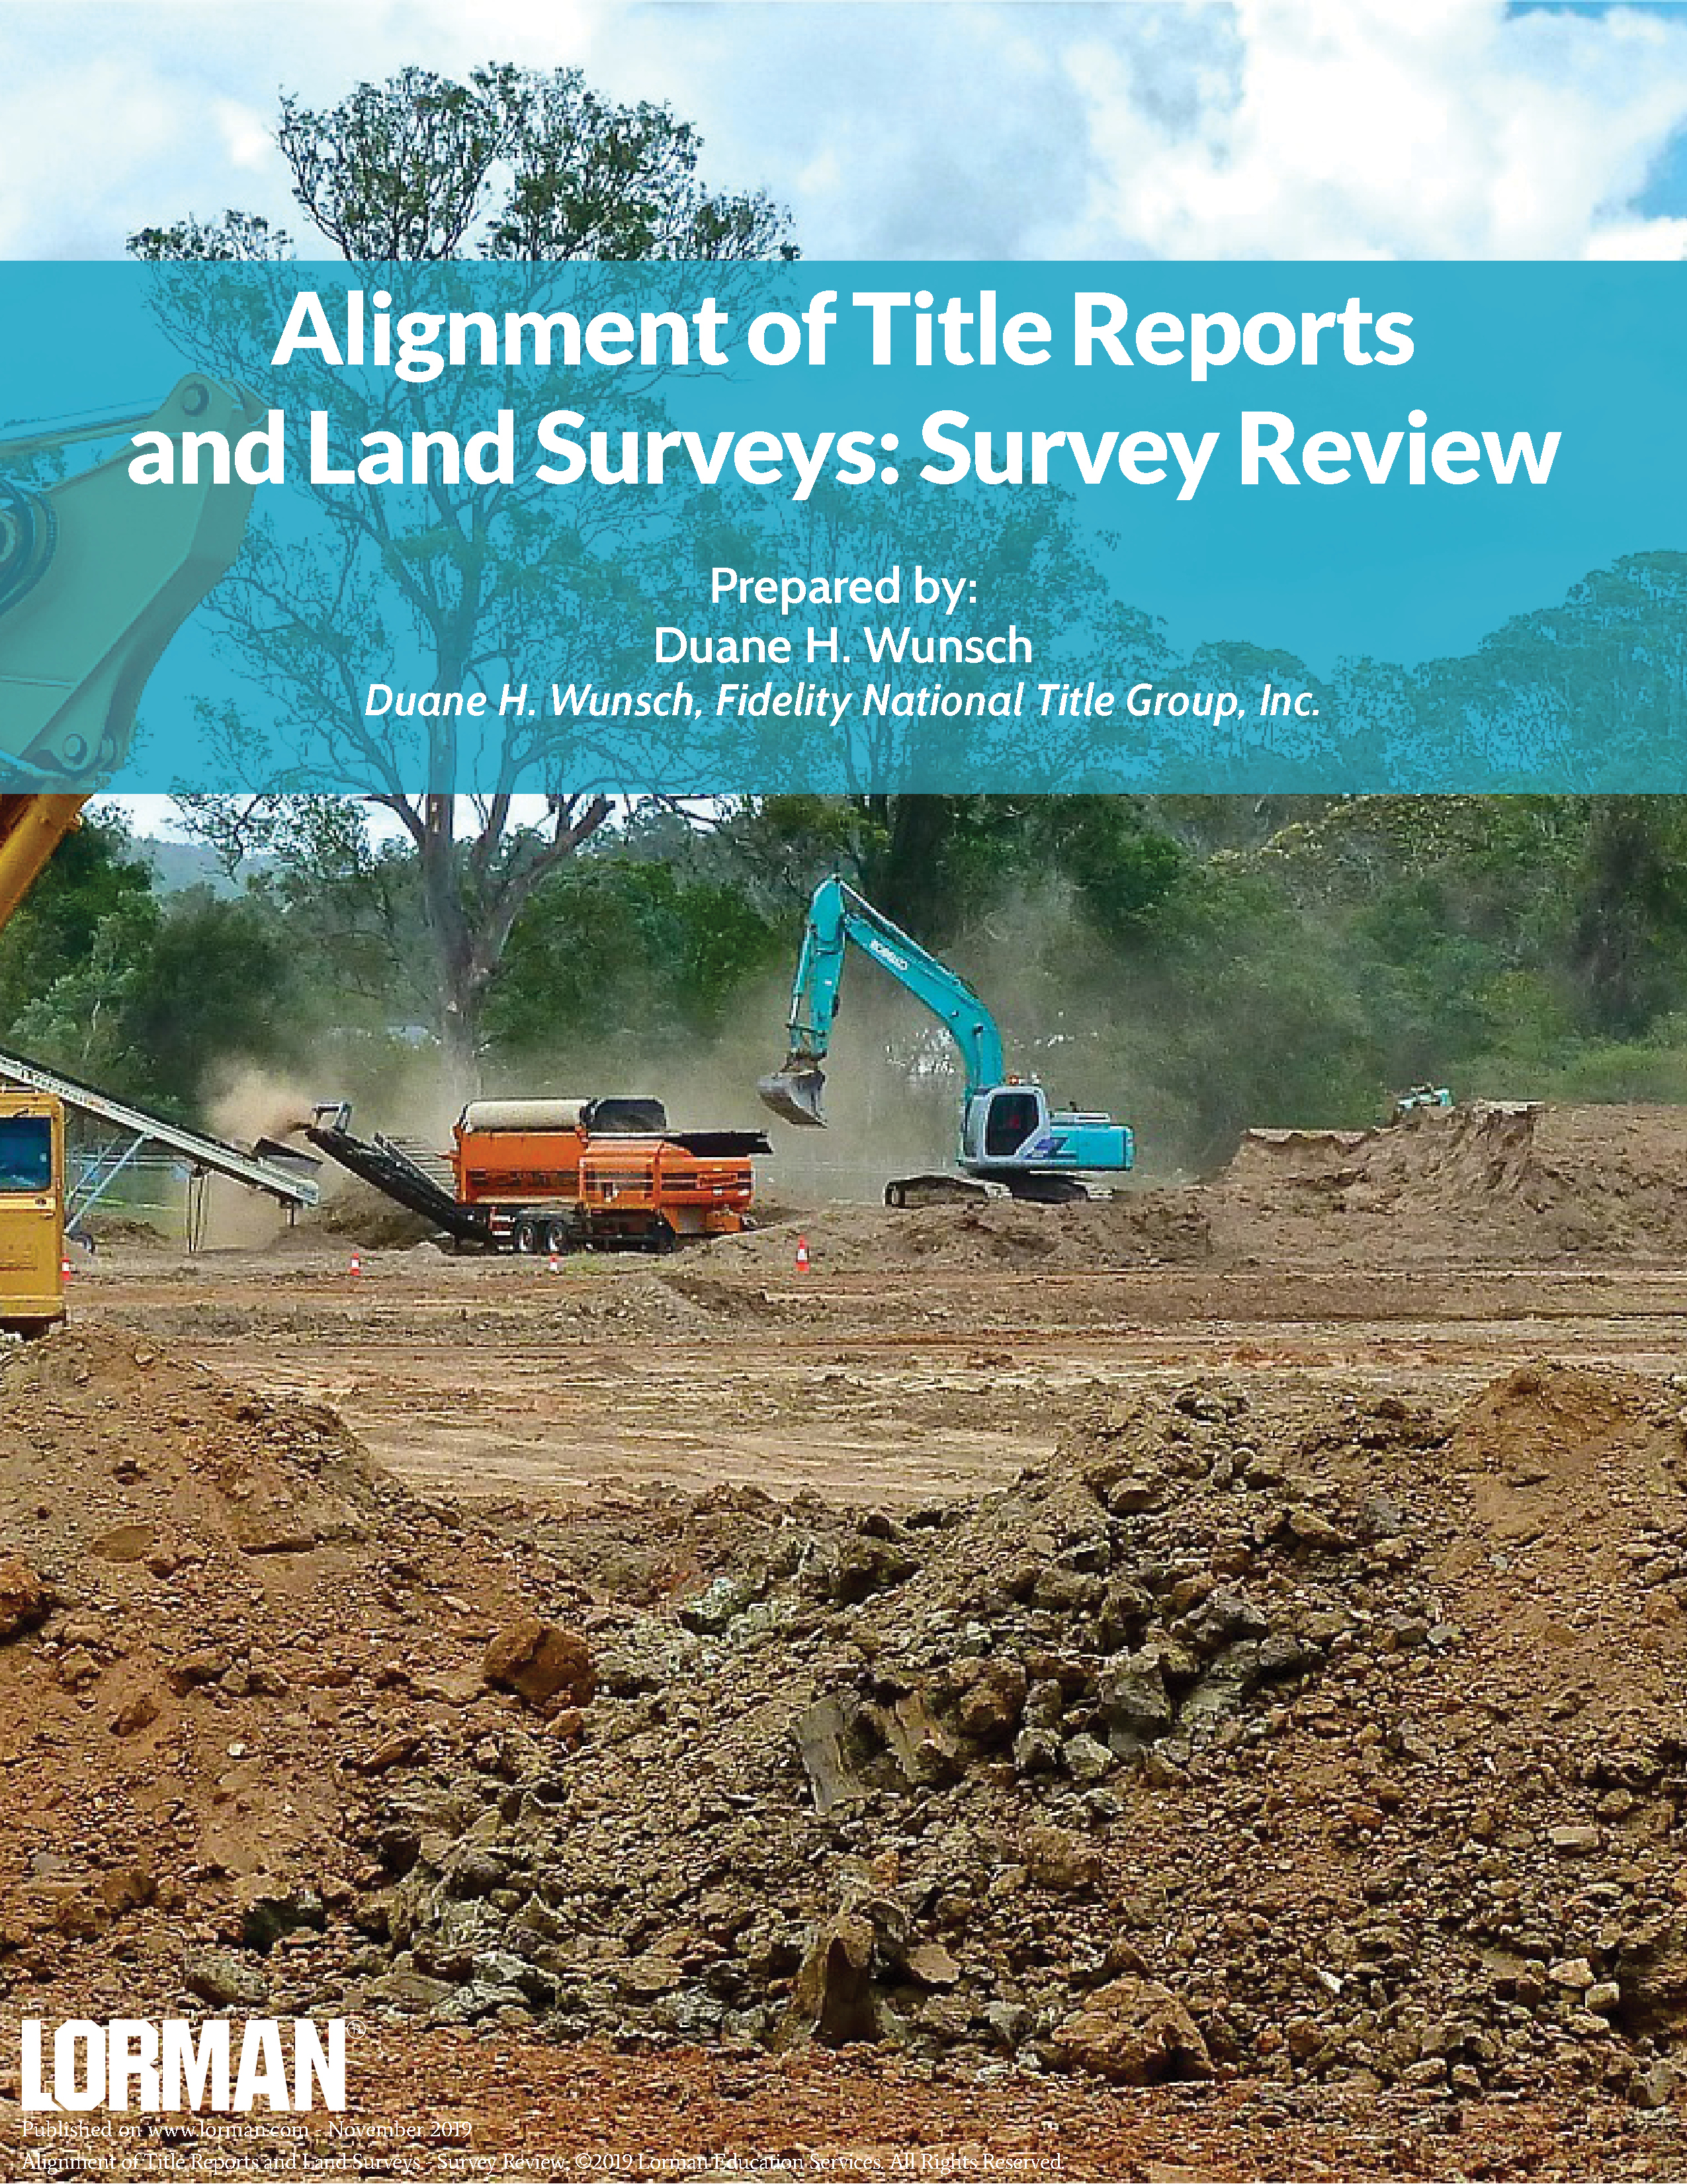 Alignment of Title Reports and Land Surveys - Survey Review